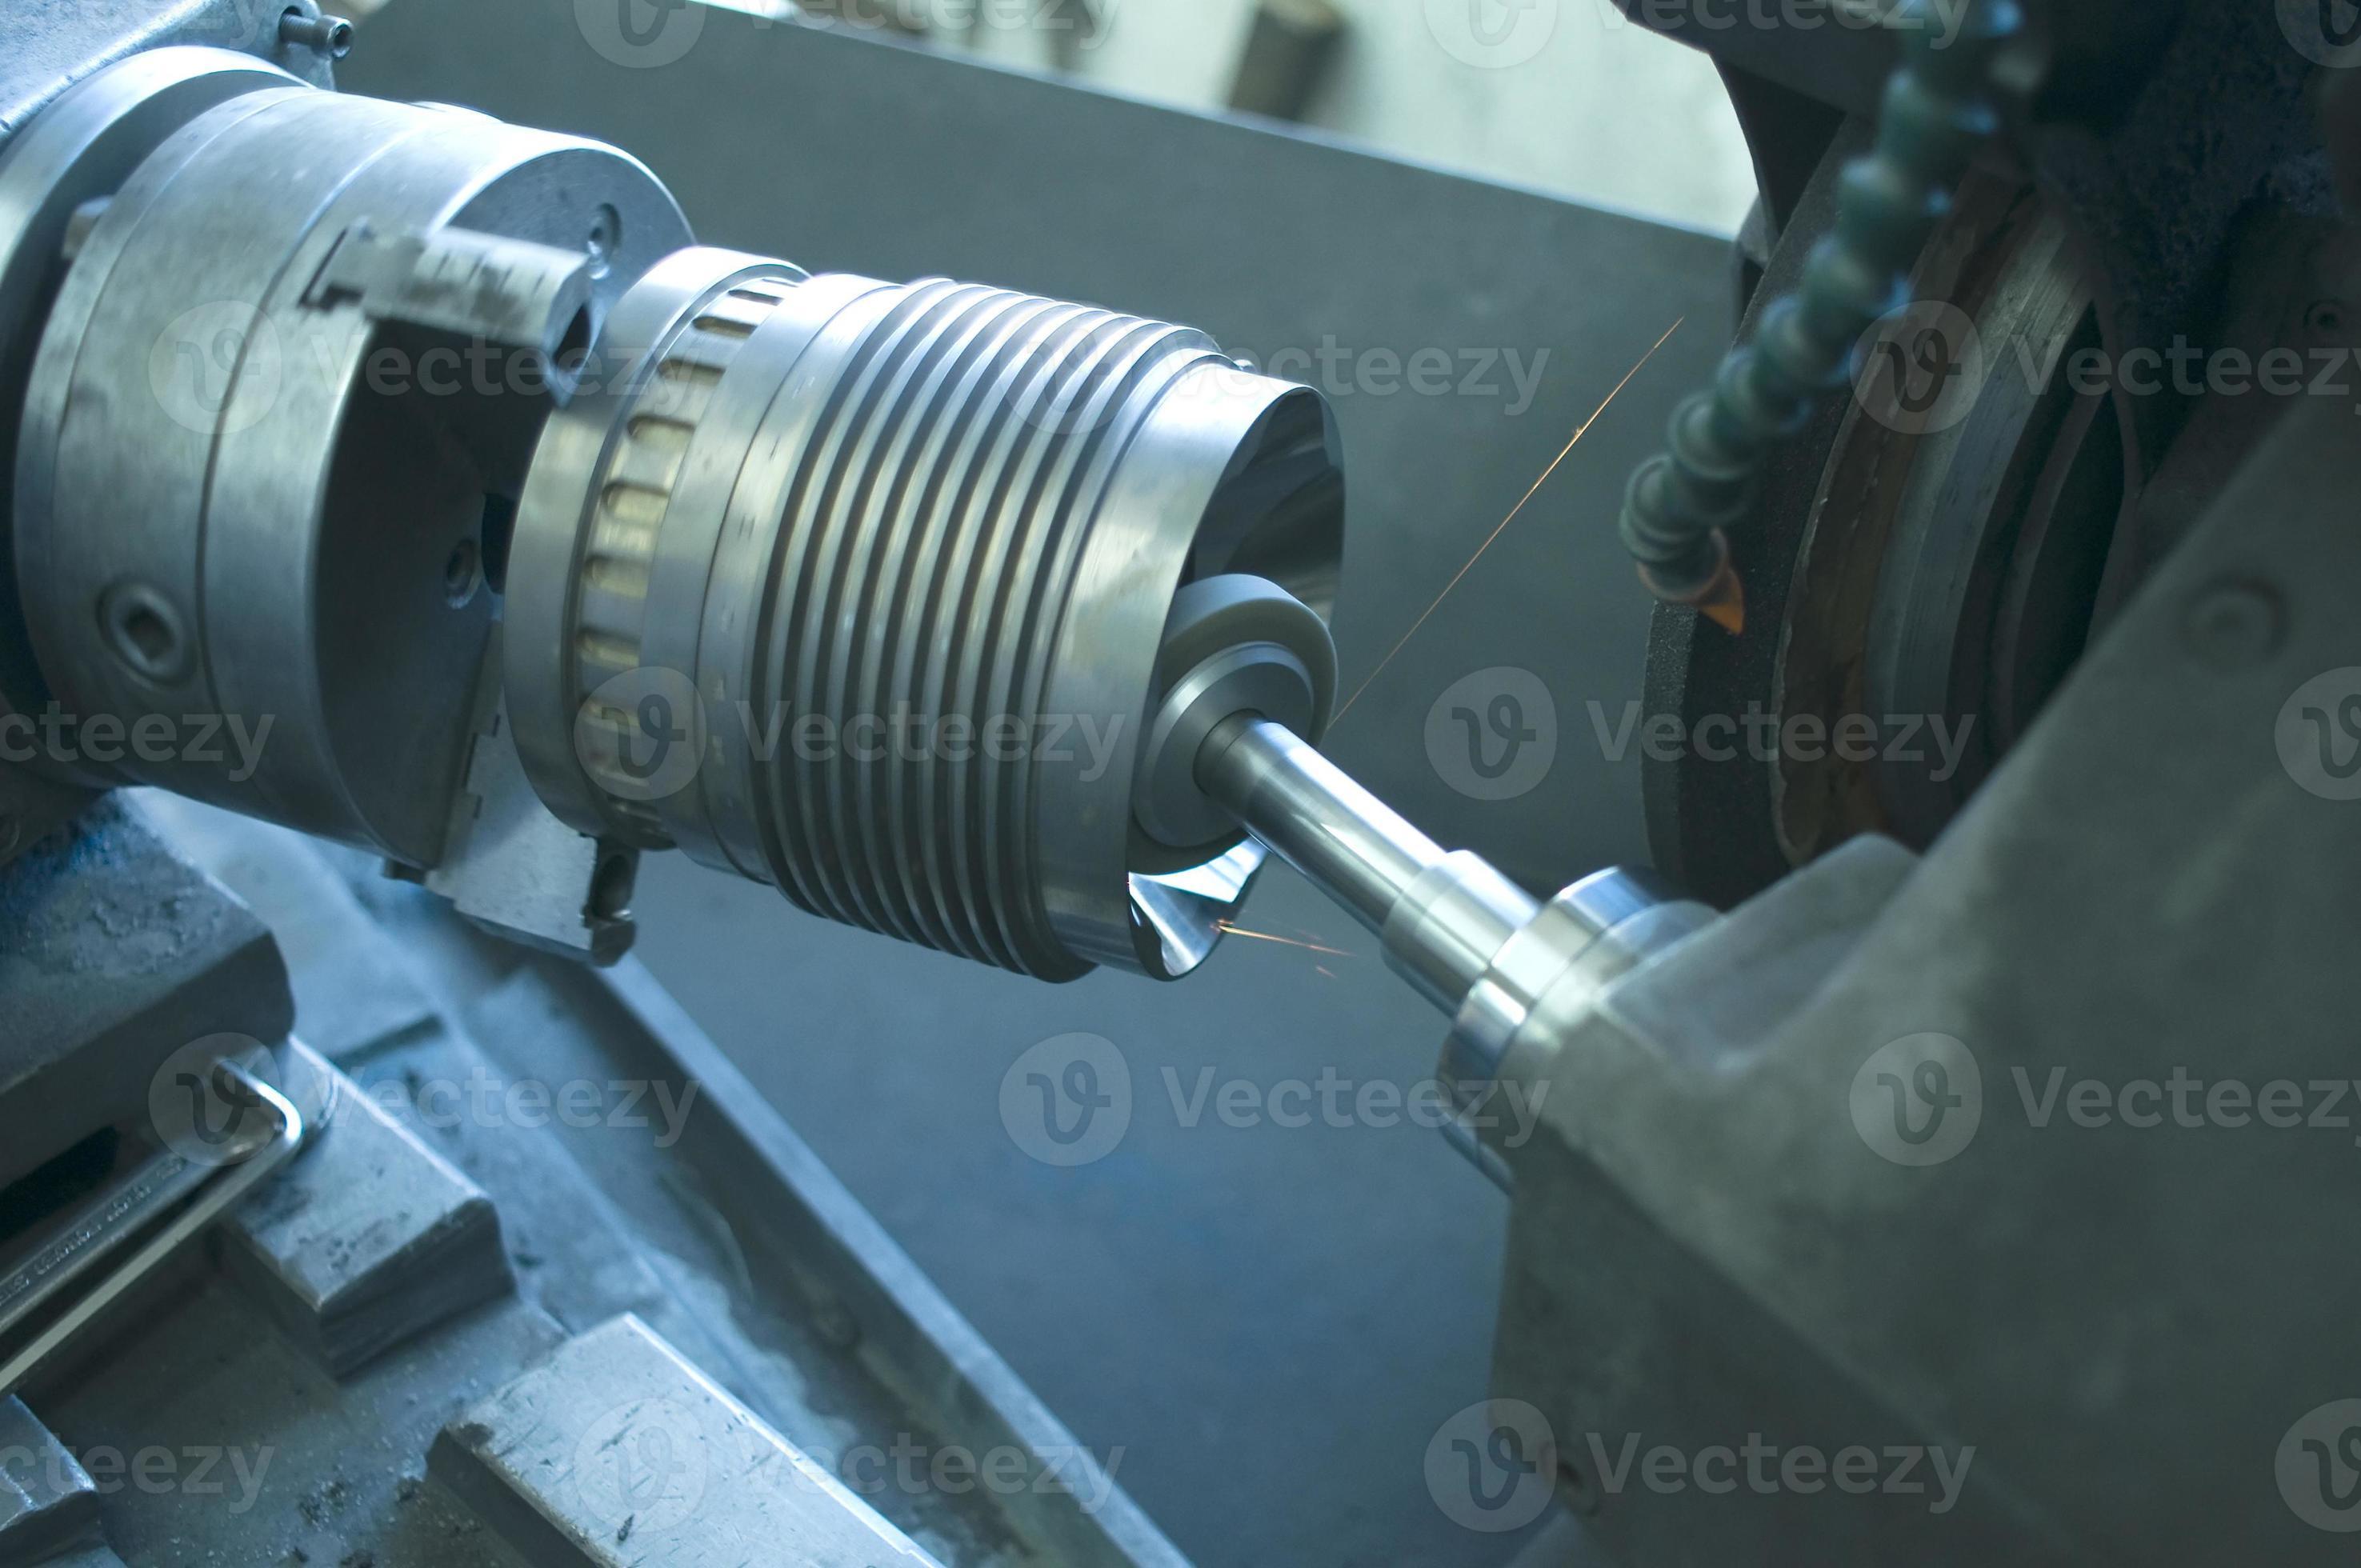 Machining lathe turning steel in a manufacturing plant photo